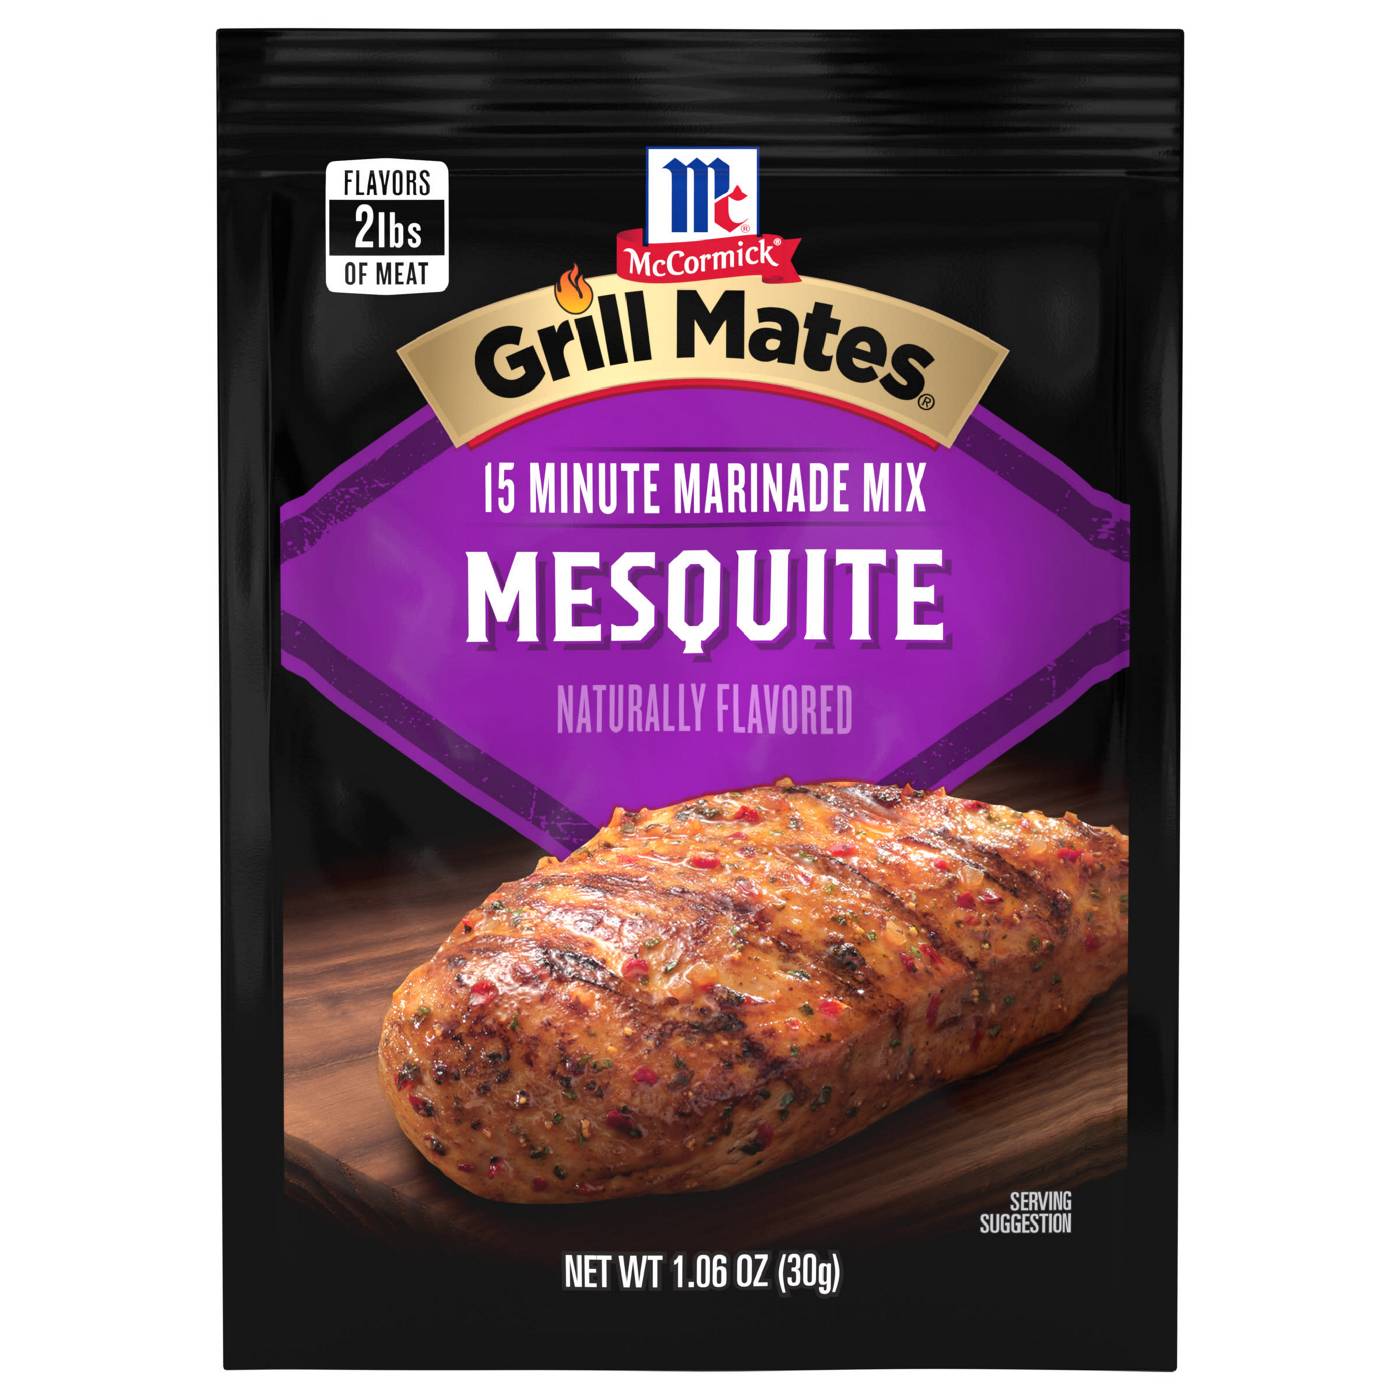 McCormick Grill Mates Mesquite Marinade; image 1 of 8